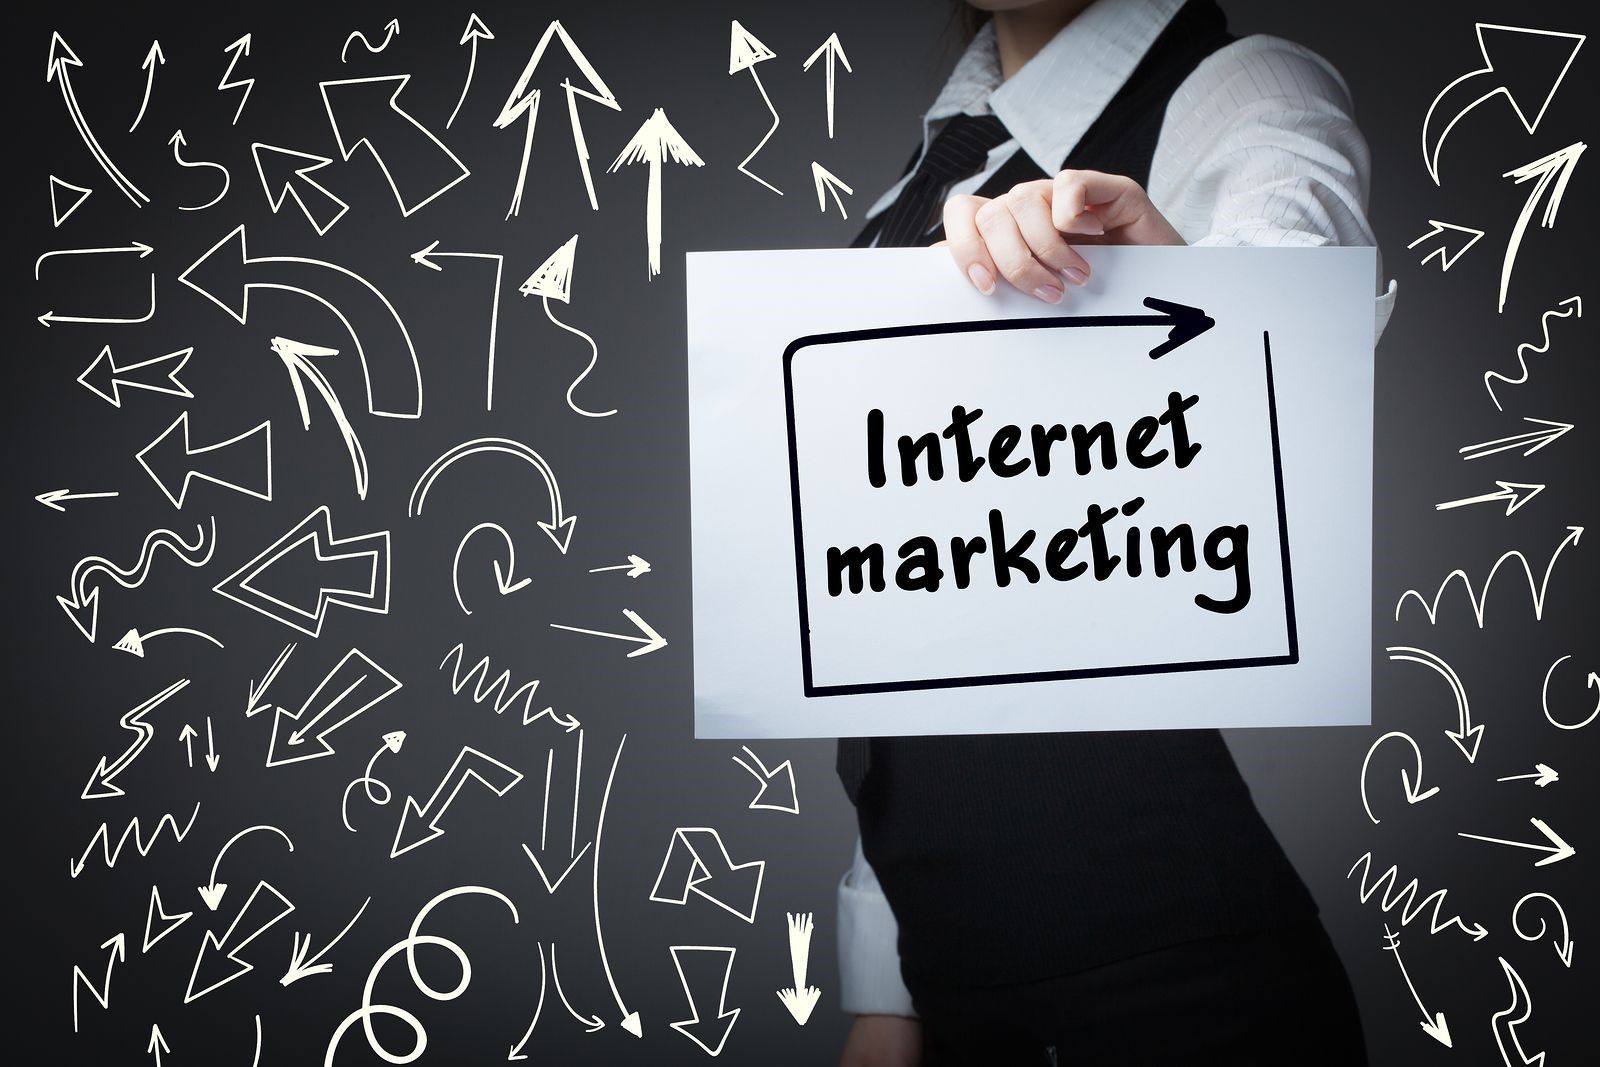 Stand Out From the Crowd with an Unusual Internet Marketing Service